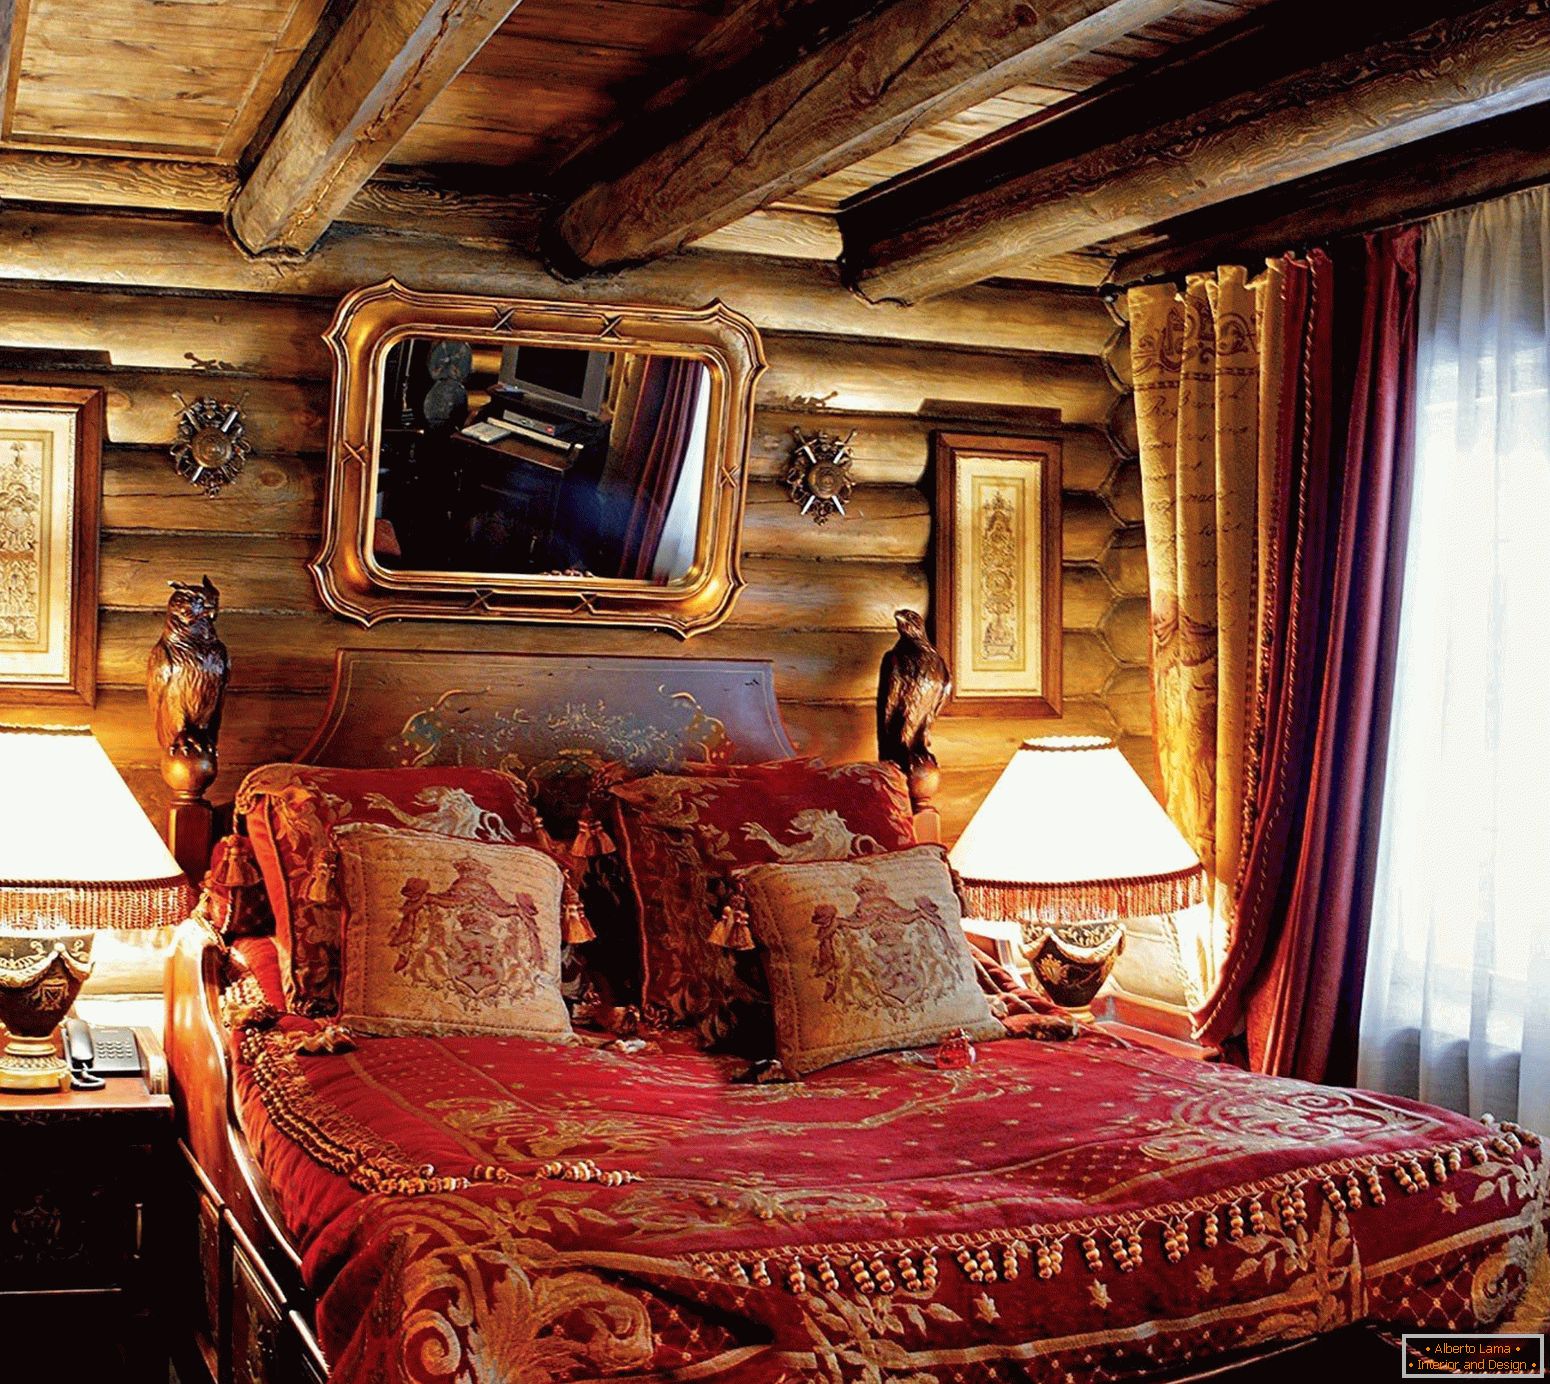 Ancient interior in the style of a chalet